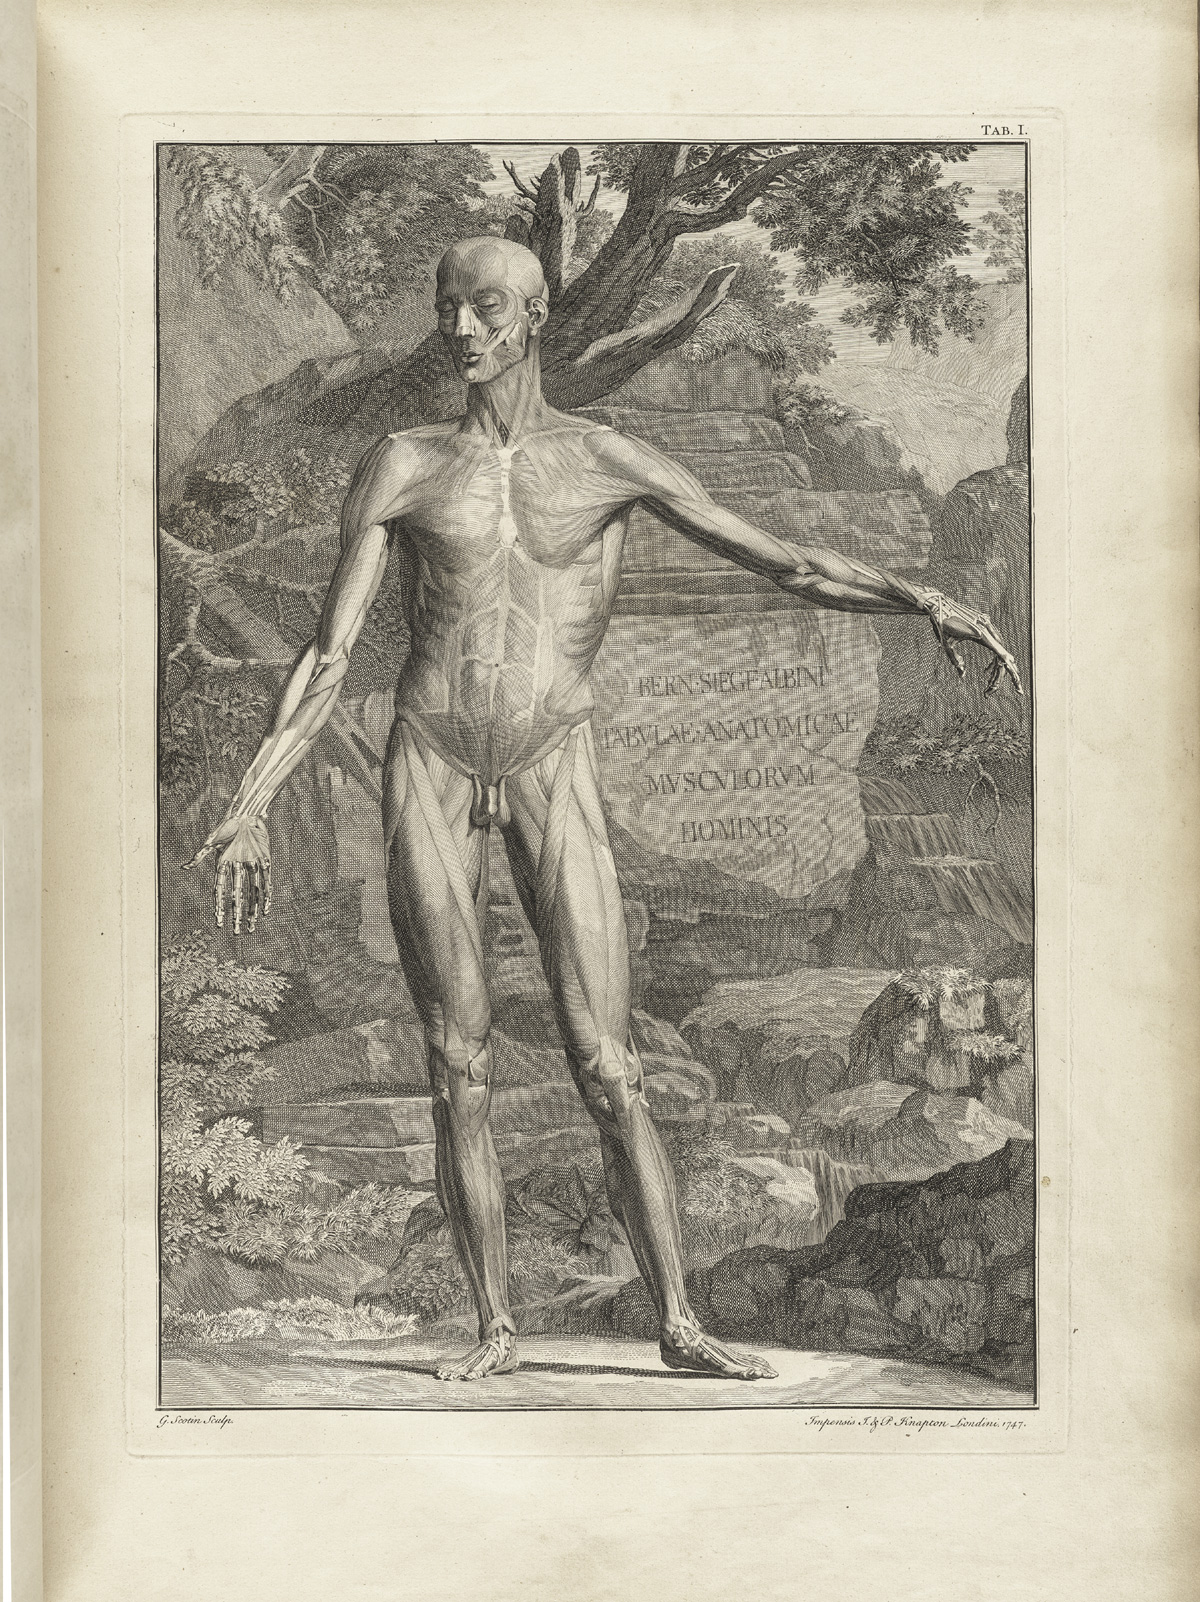 A full length frontal view of a flayed corpse in a landscape. Its left arm is extended and carved into a rock behind the corpse is Bern Siegf Albini Tabulae Anatomicae Musculorum Hominis.